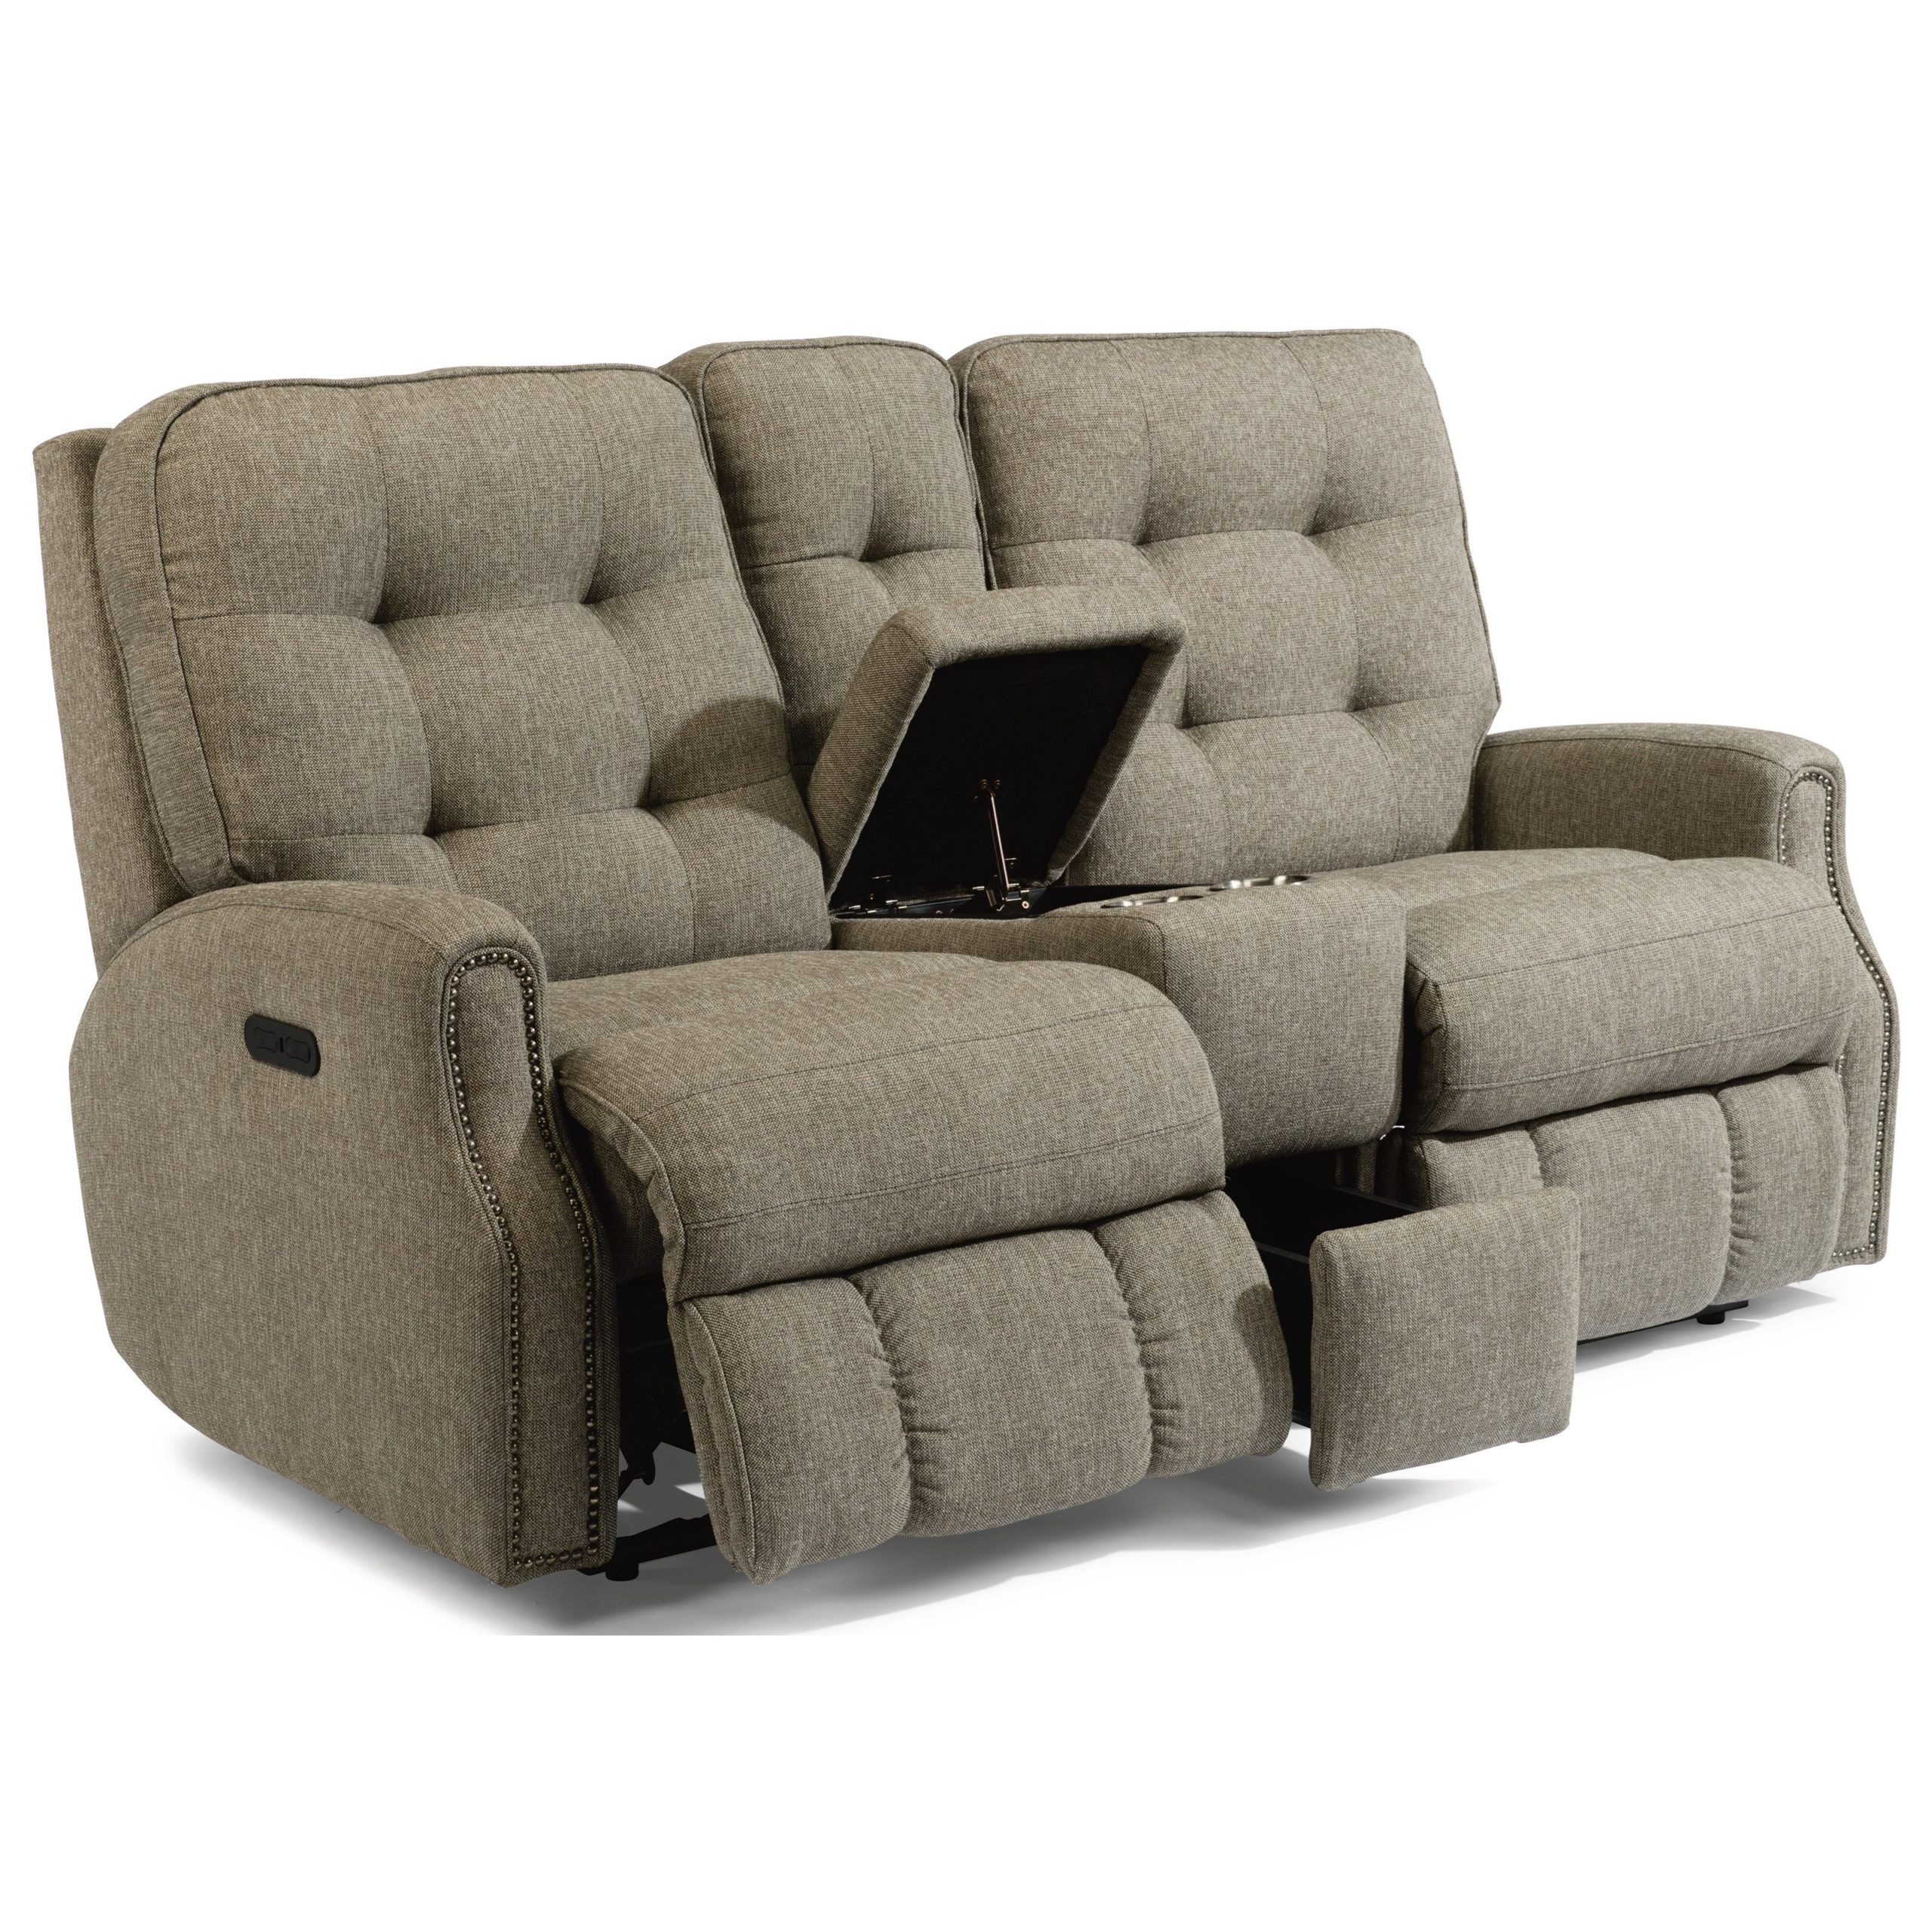 Flexsteel Devon Button Tufted Power Reclining Loveseat Intended For Expedition Brown Power Reclining Sofas (View 10 of 15)